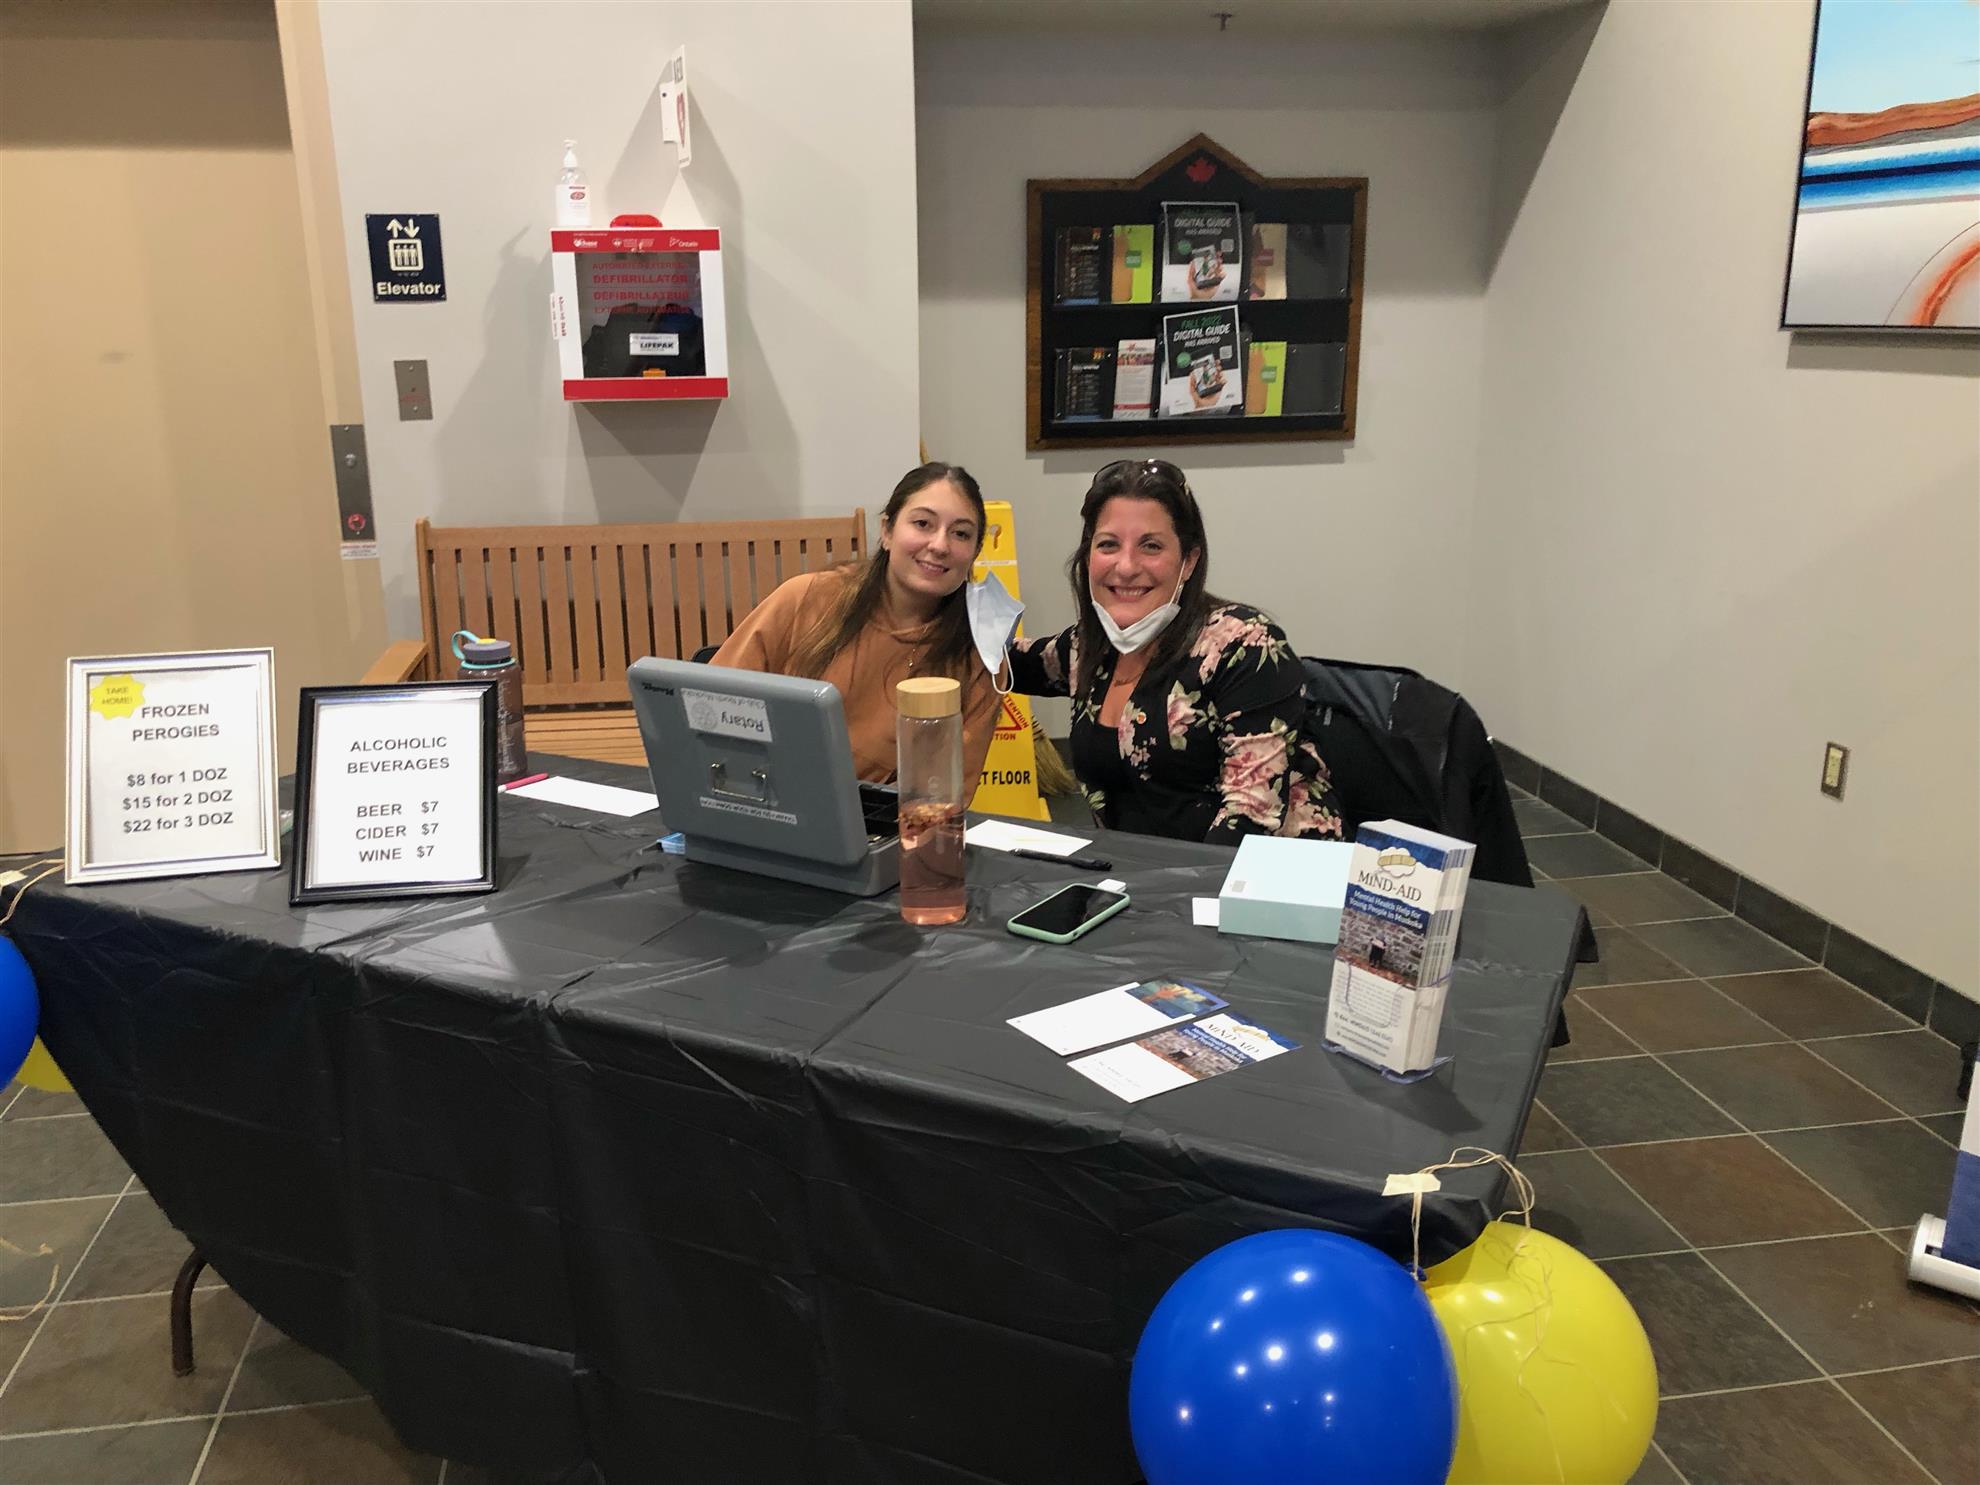 two smiling woman seated at a table. they are selling event tickets.